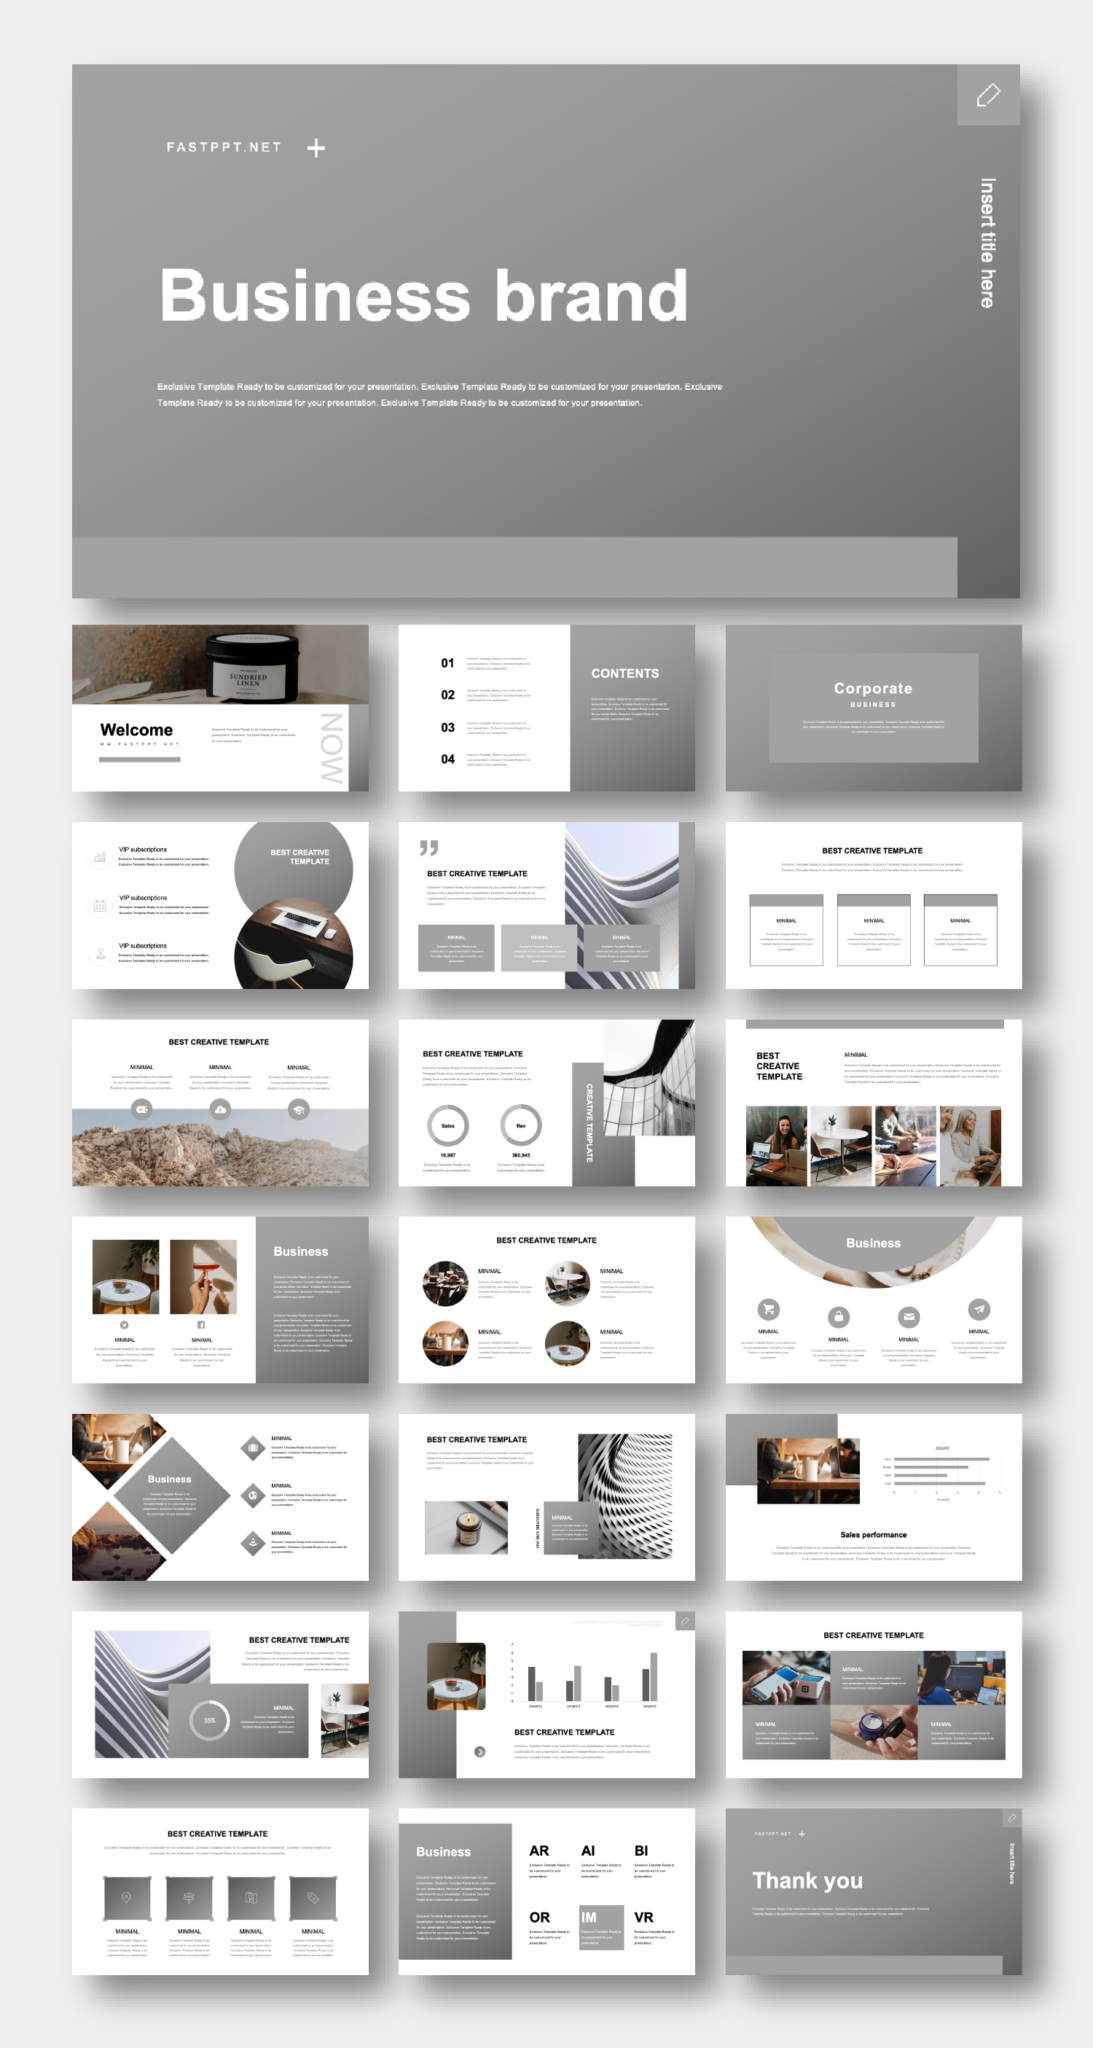 Gradient Blue Gray Business Brand Template – Original and High Quality ...